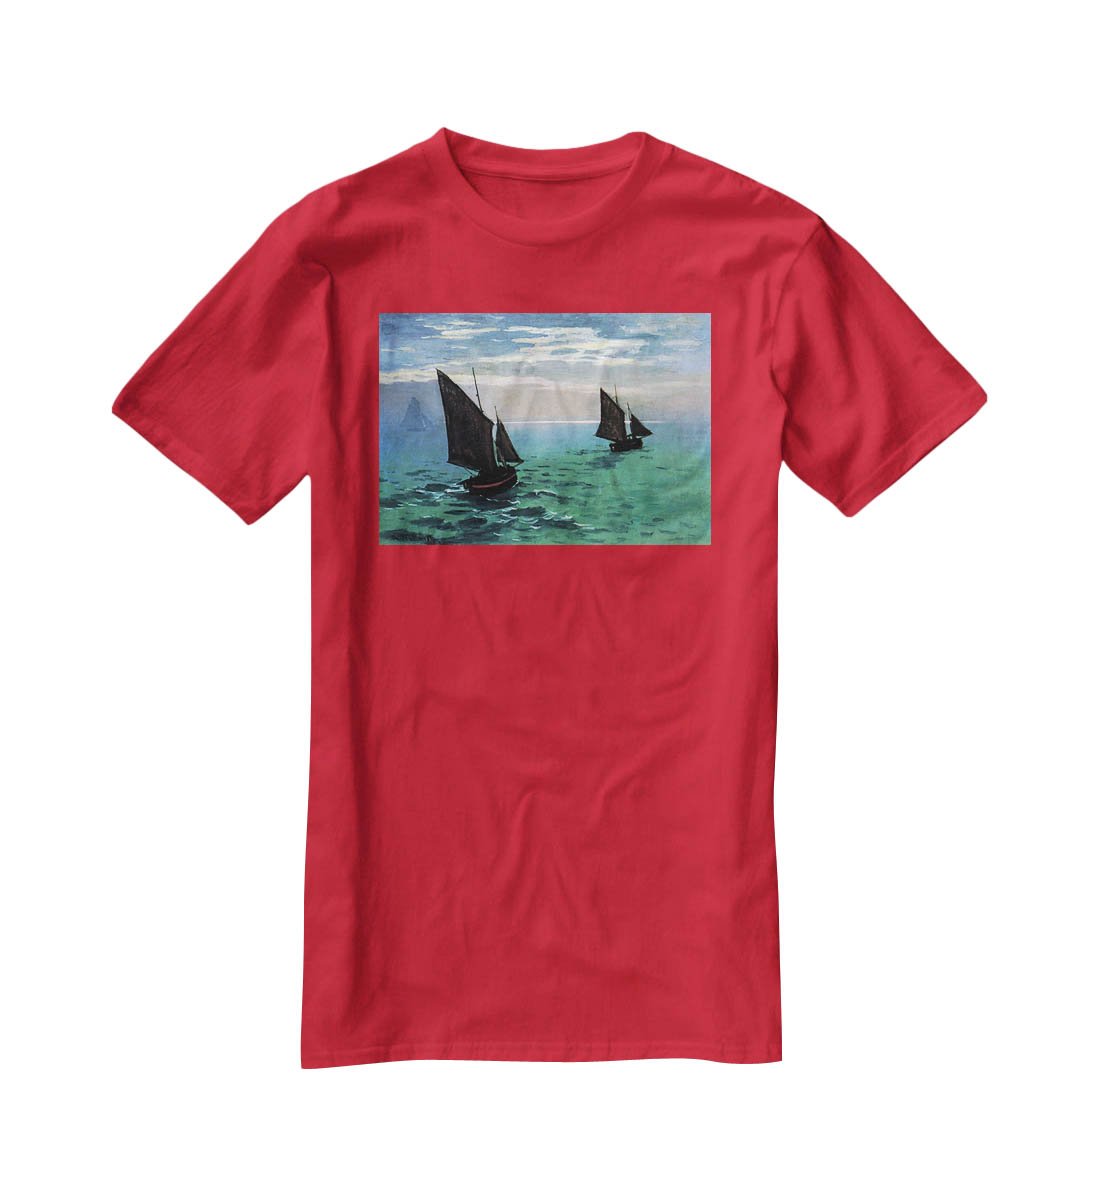 Le Havre exit the fishing boats from the port by Monet T-Shirt - Canvas Art Rocks - 4